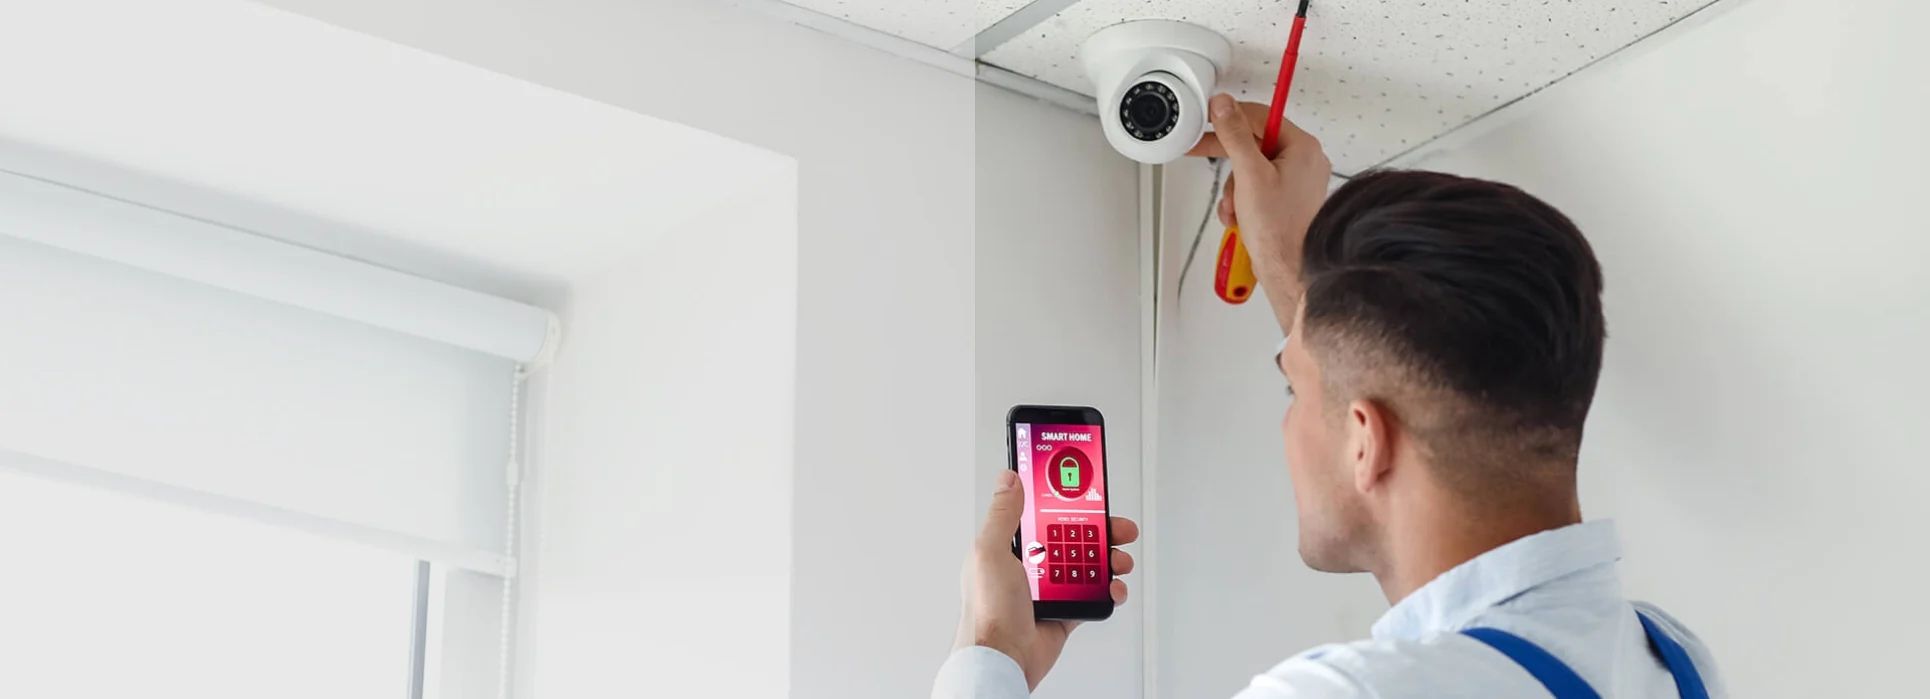 how-to-start-a-smart-home-installation-business